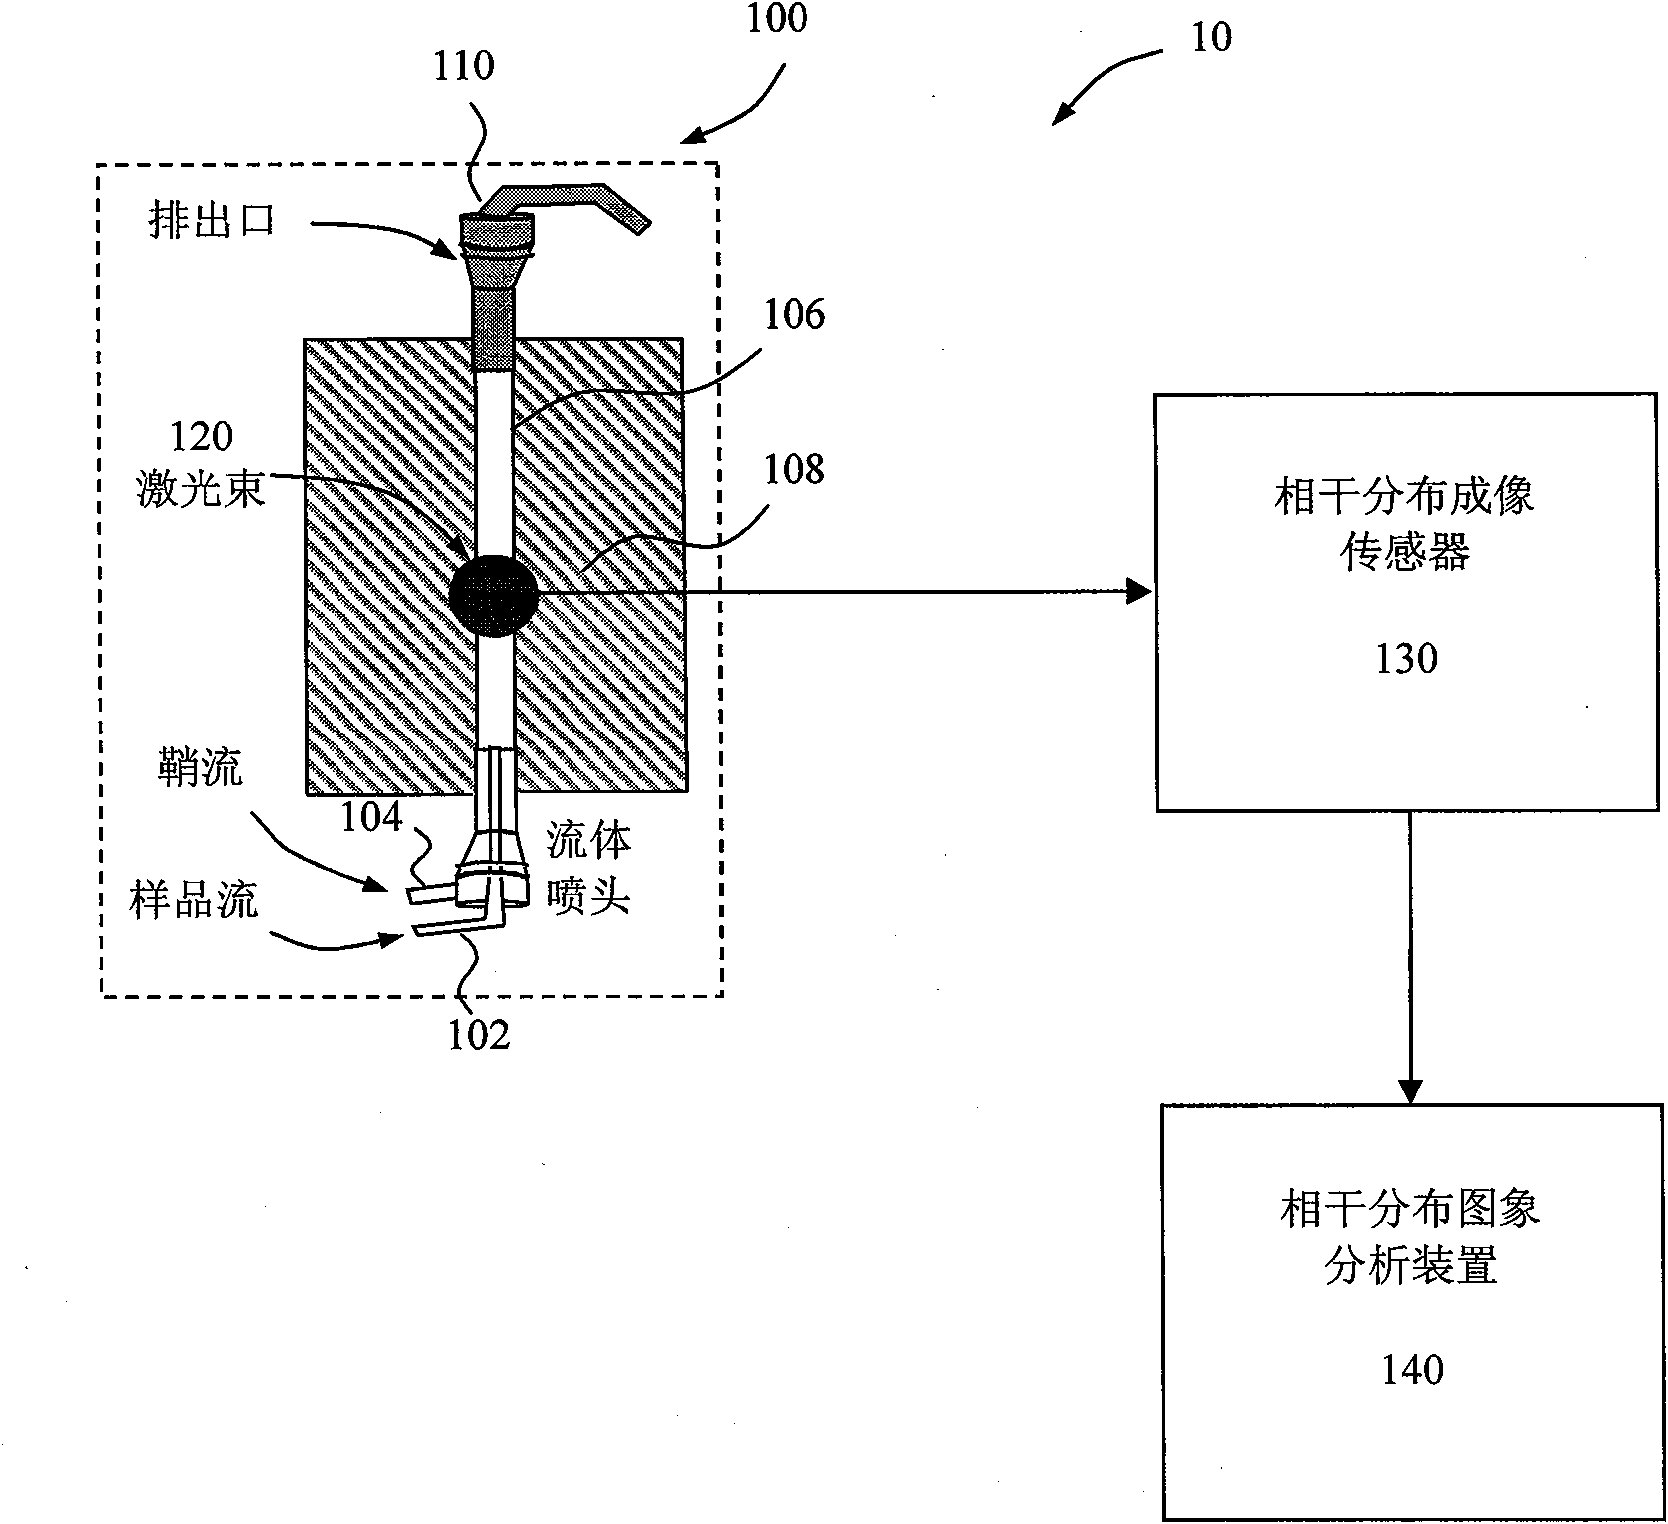 Flow cytometer apparatus for three dimensional diffraction imaging and related methods